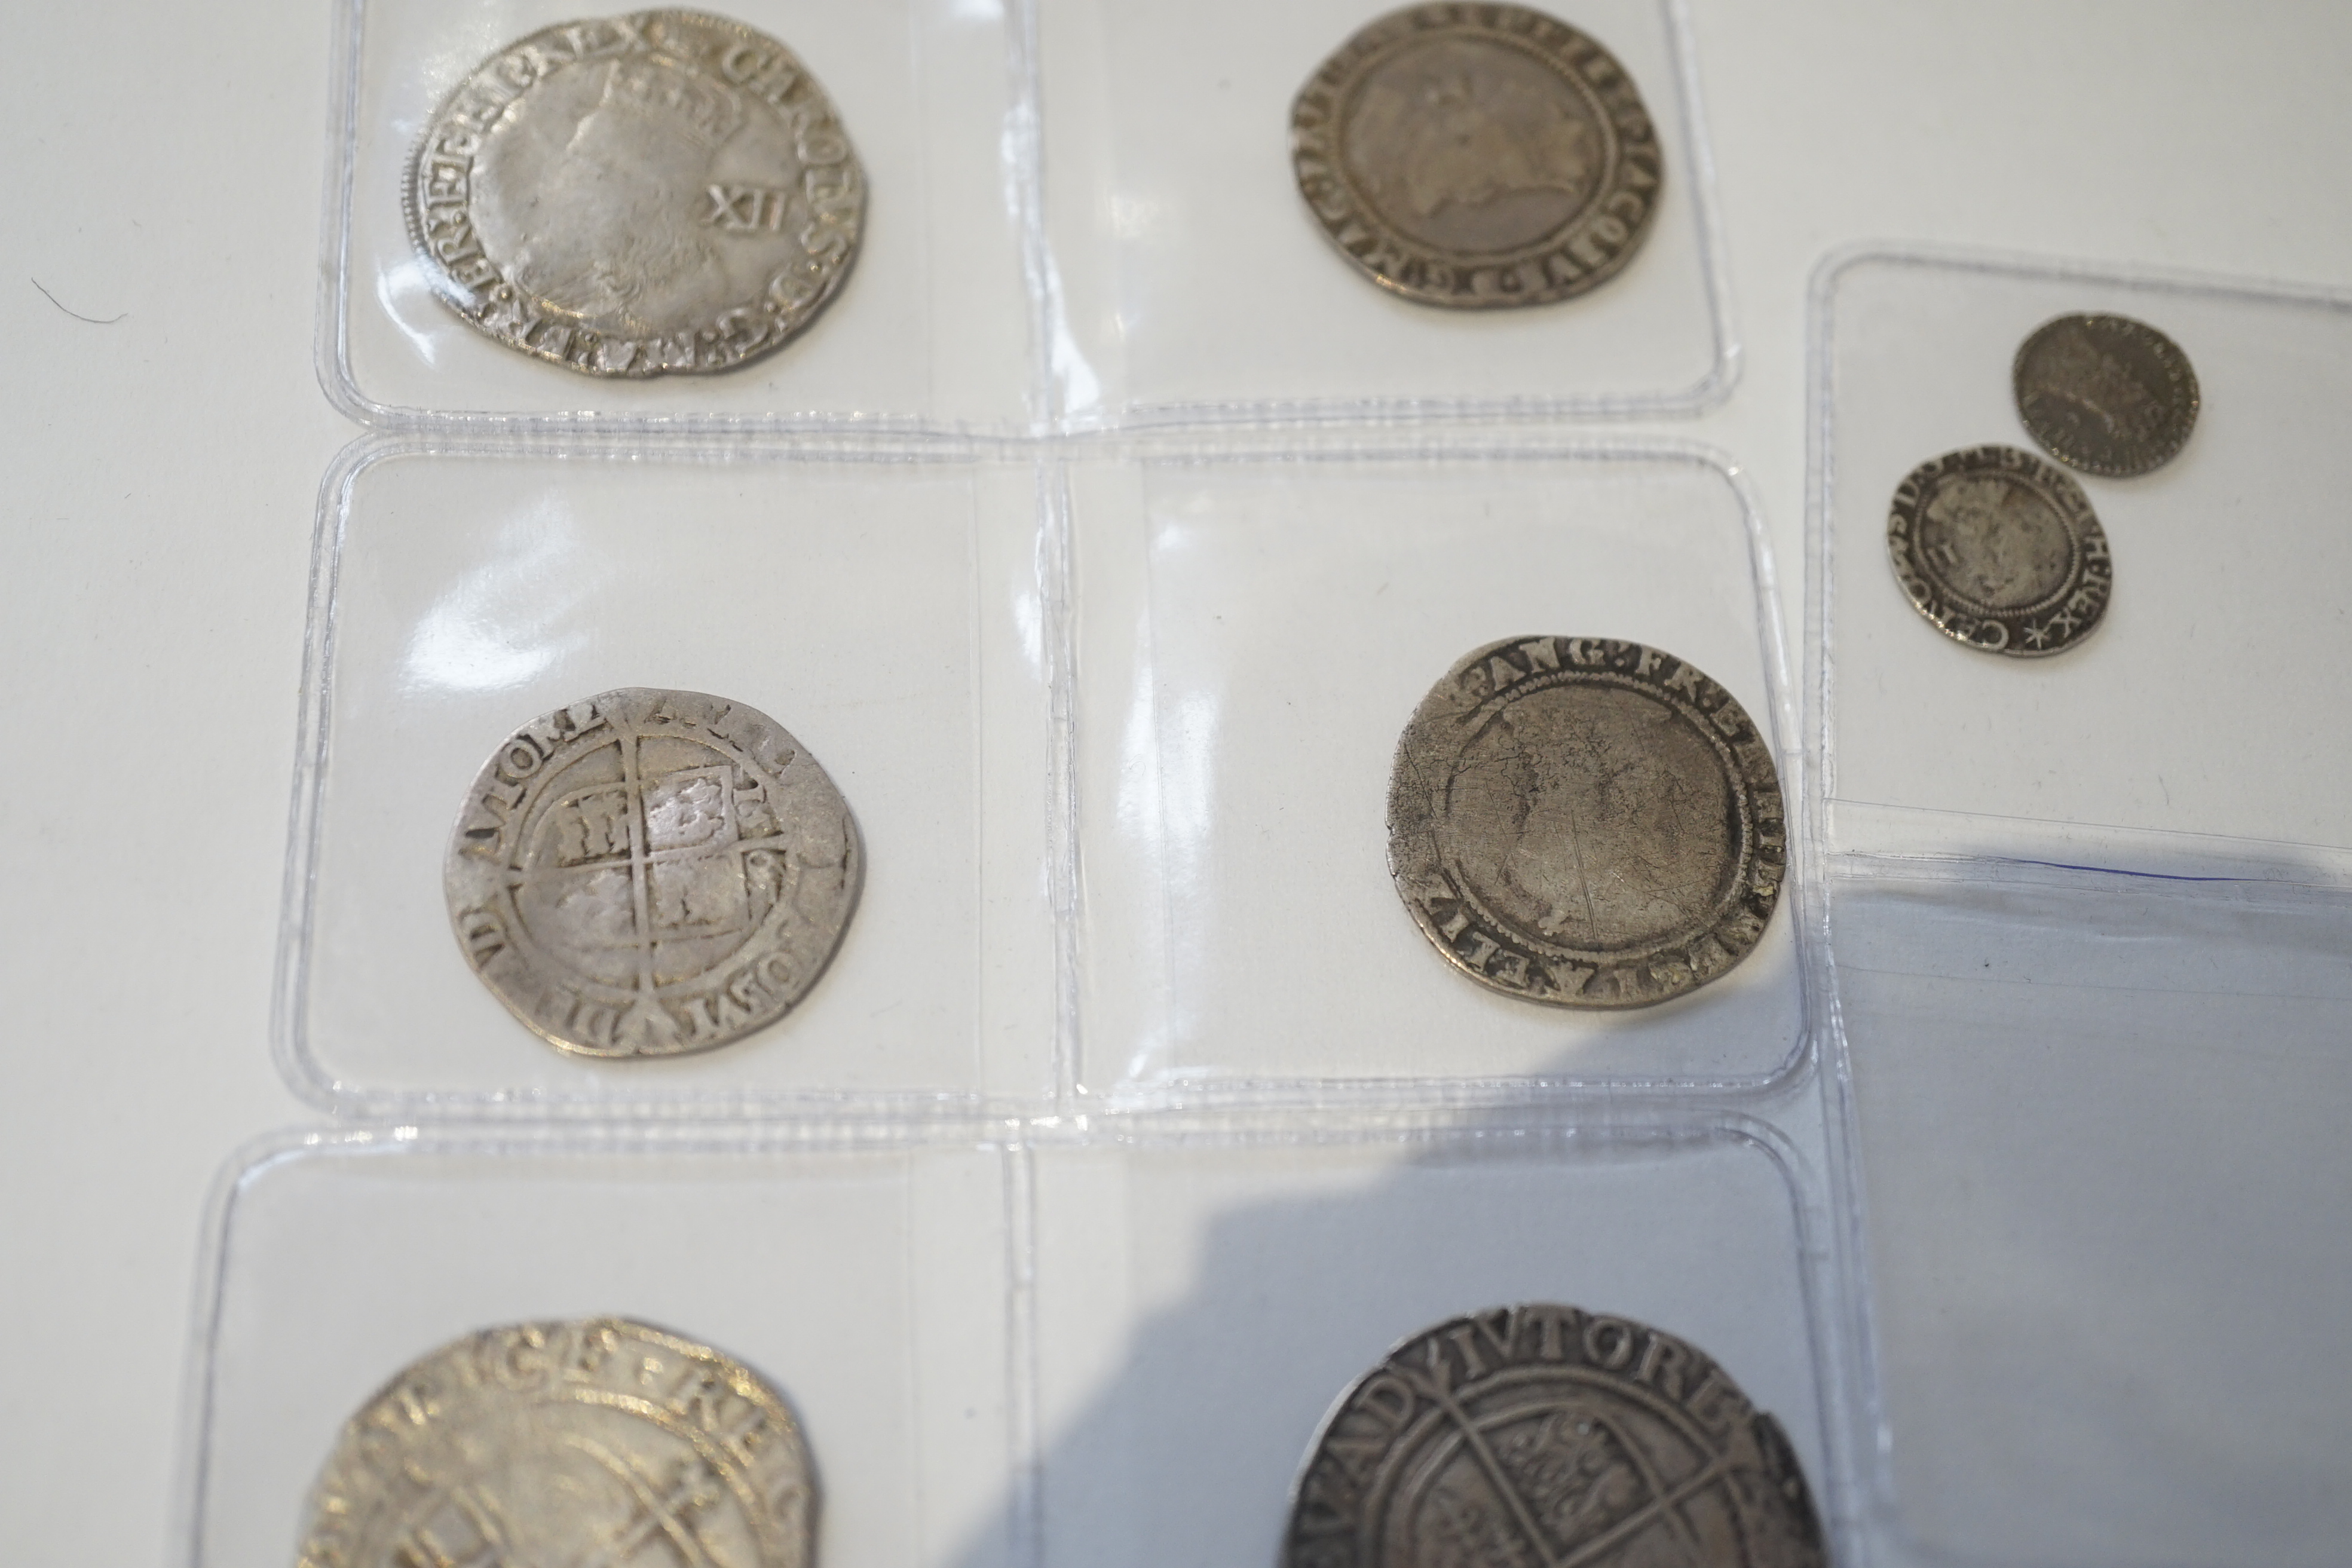 British Tudor and Stuart hammered silver coins, an Elizabeth I shilling and two sixpences, a James I sixpence, two Charles I shillings, a Charles II penny, first issue, 1660-62, (S3311) VF, twopence (S3310) (8)